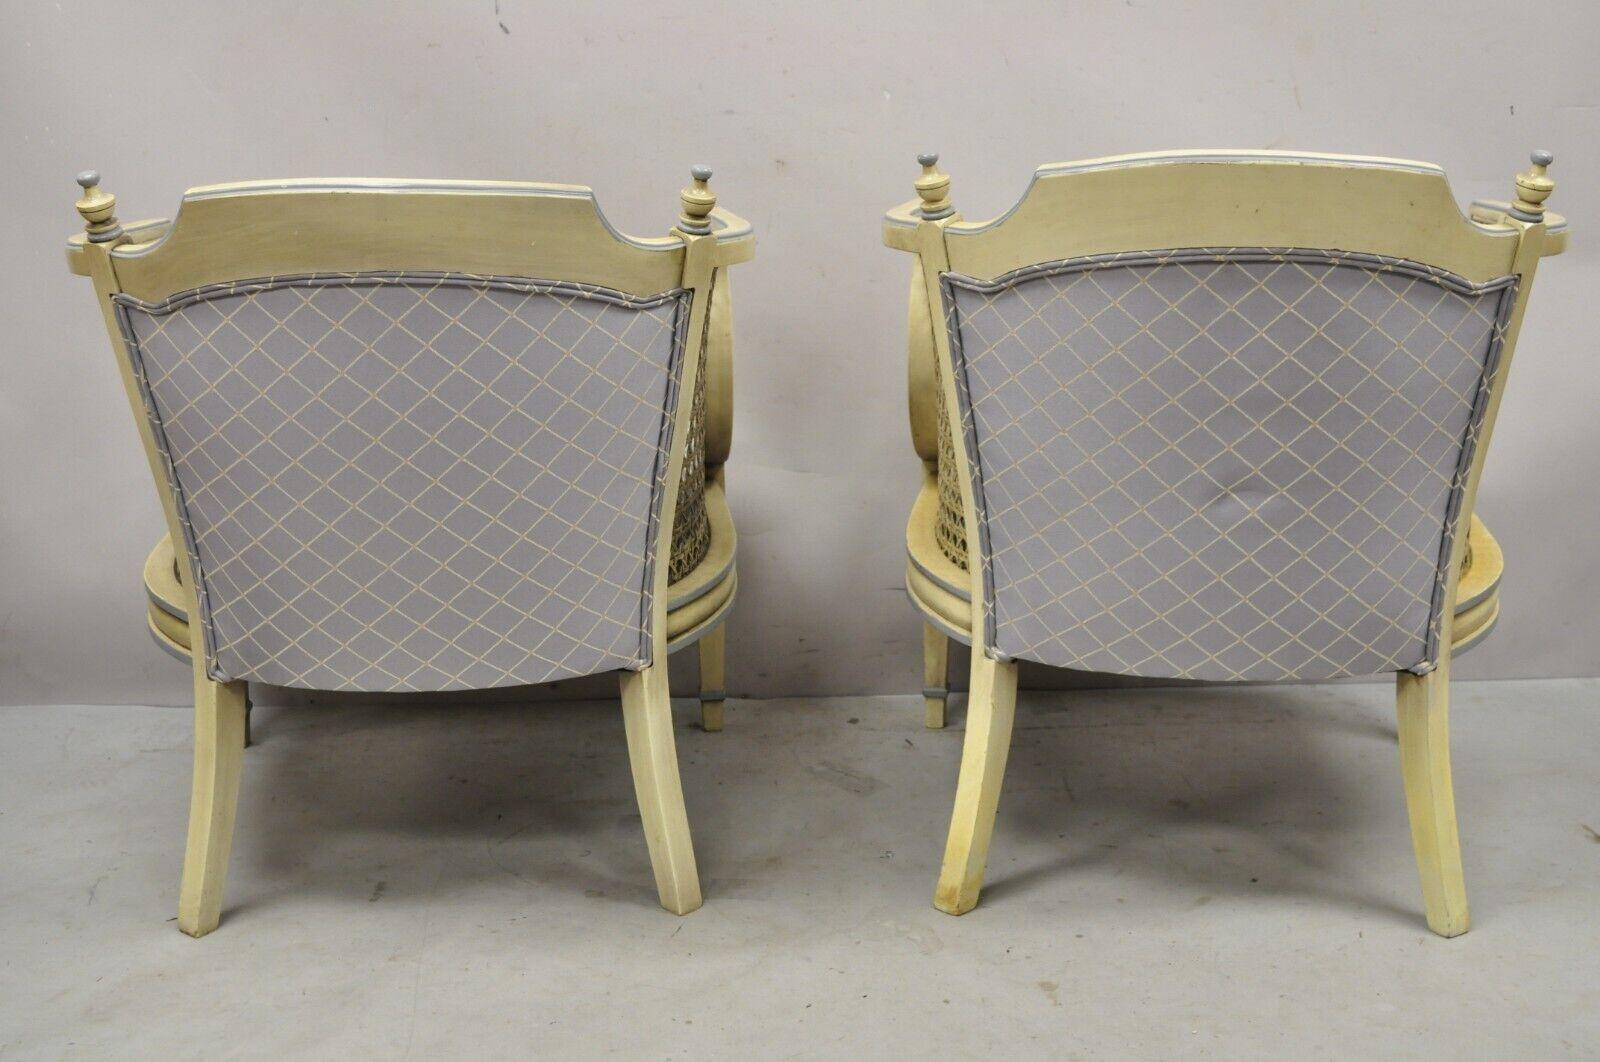 Vintage Hollywood Regency Cream Painted Cane Side Club Lounge Chairs, Pair For Sale 4